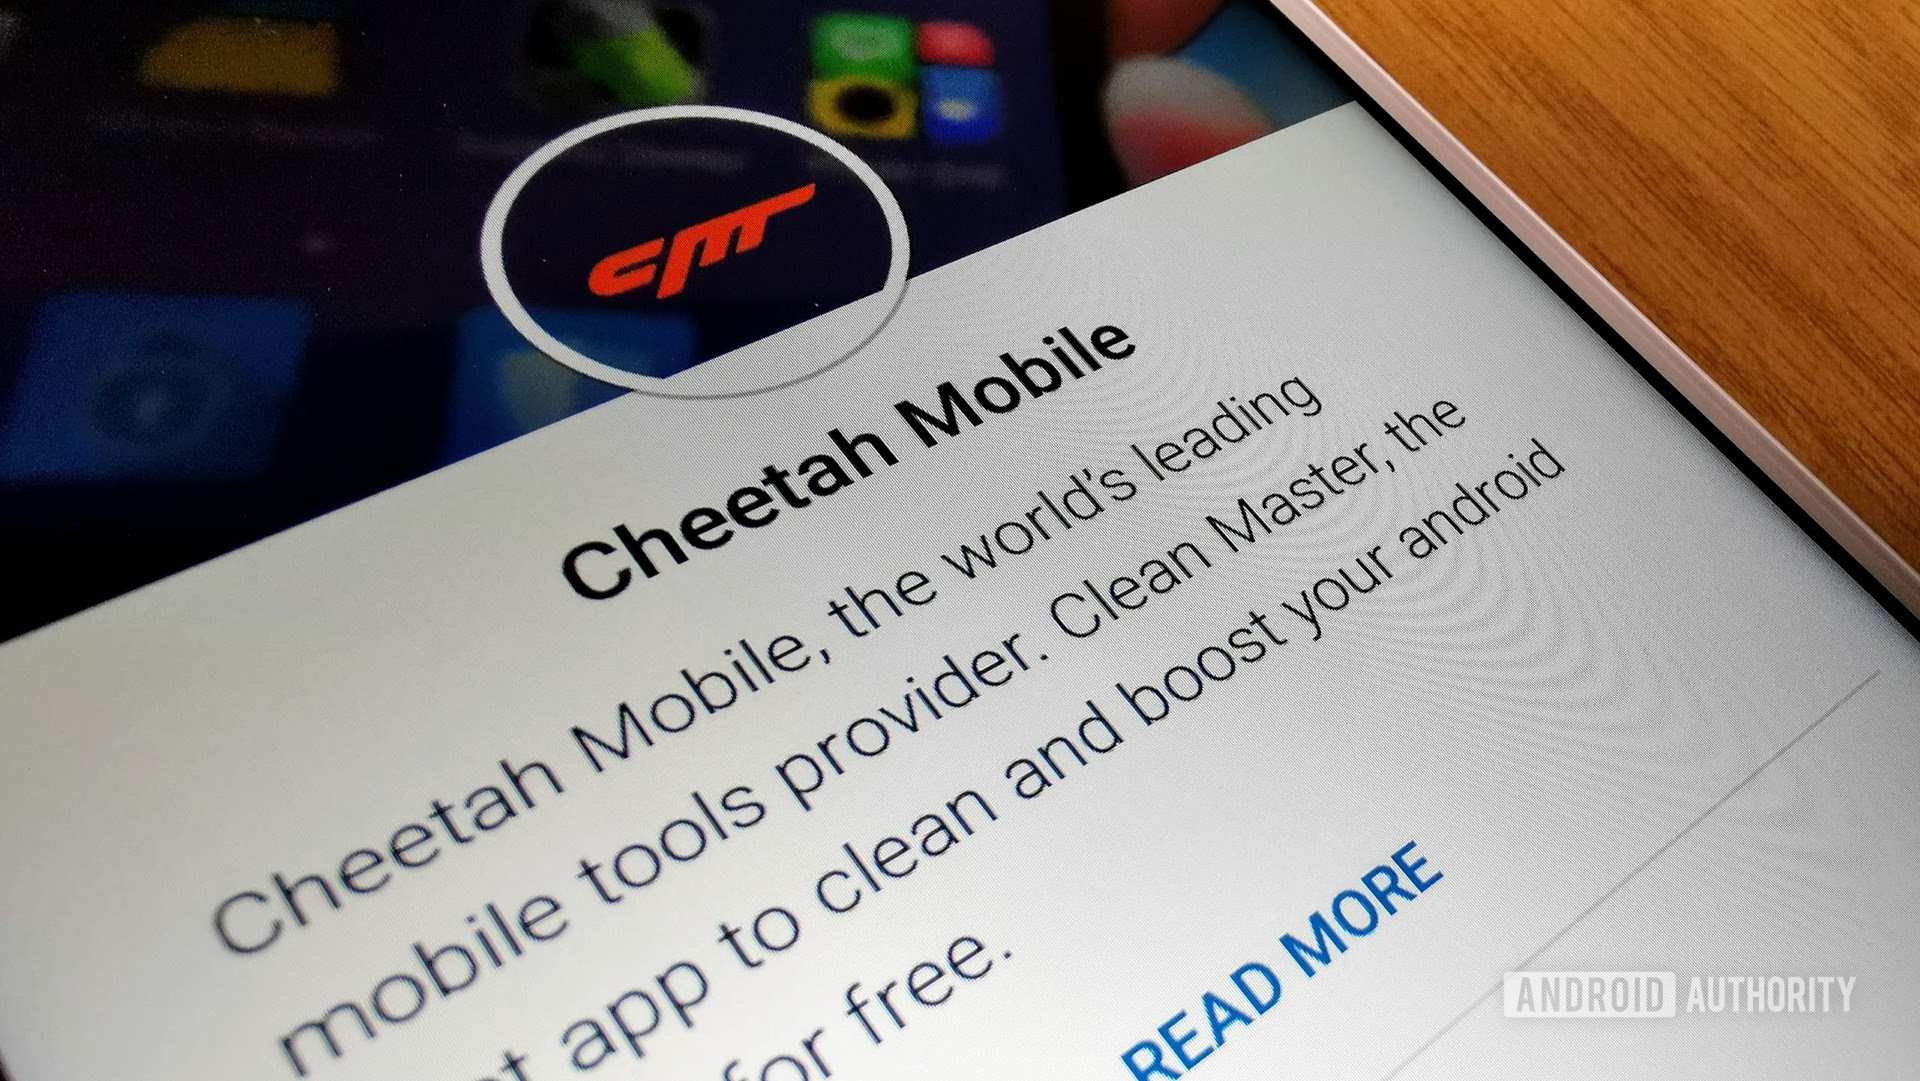 The Cheetah Mobile Play Store page.